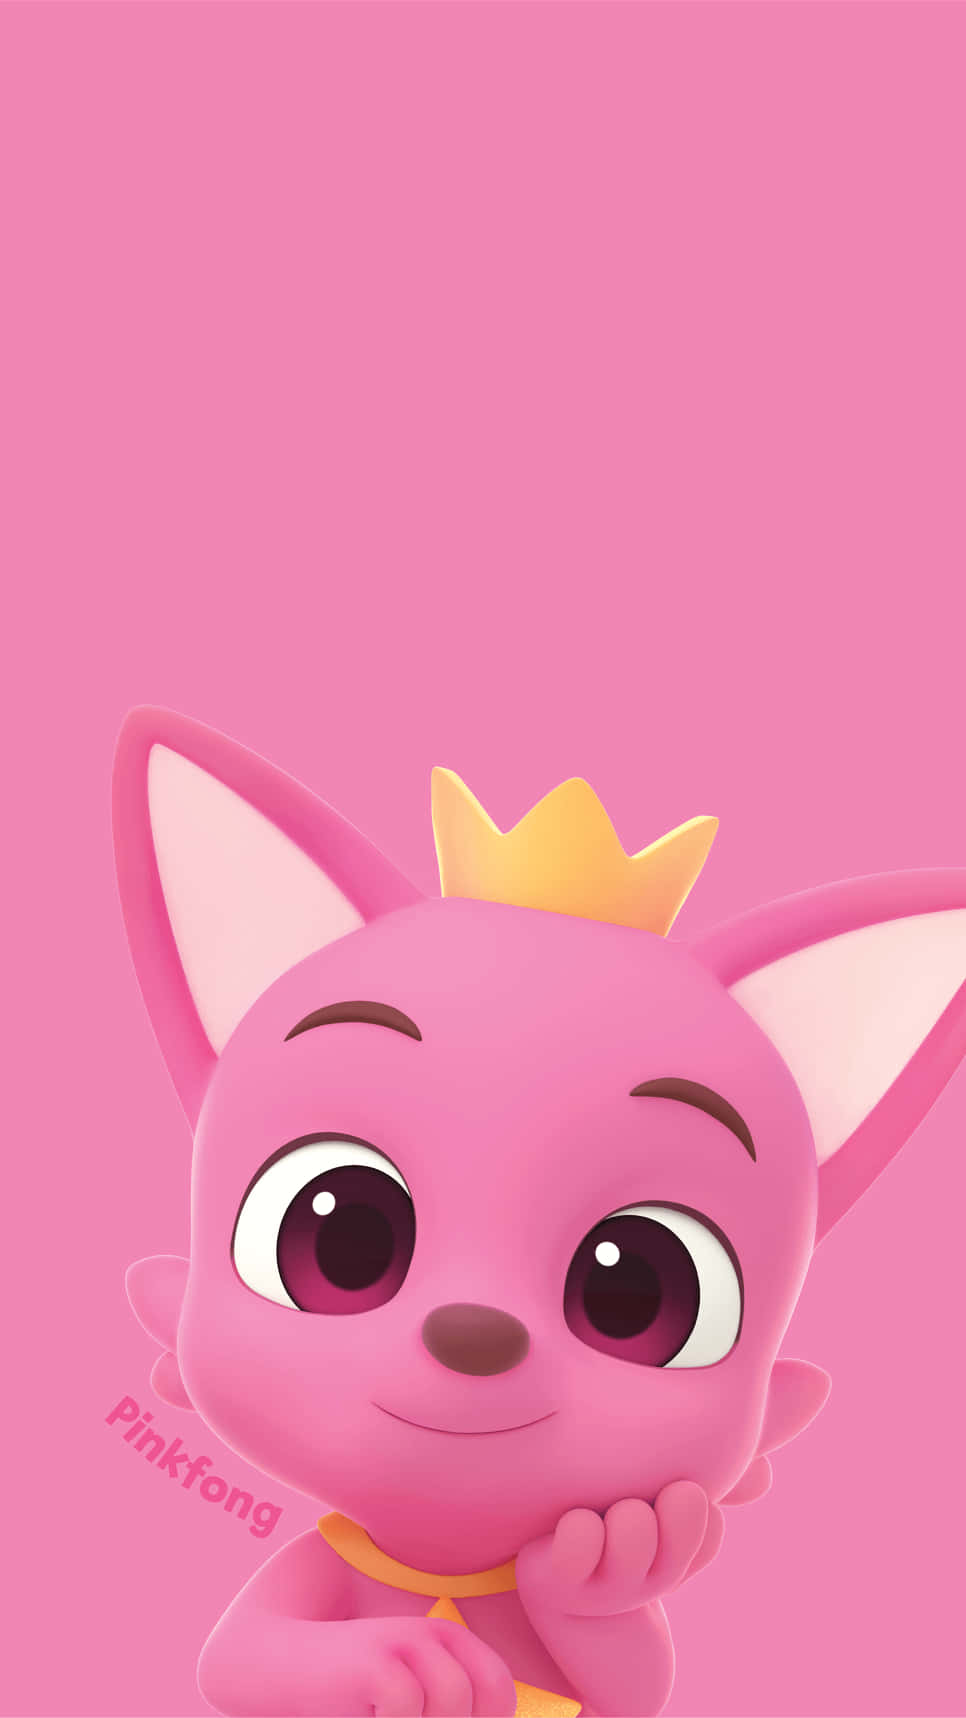 Baby Shark Background Pinkfong Arms On Face